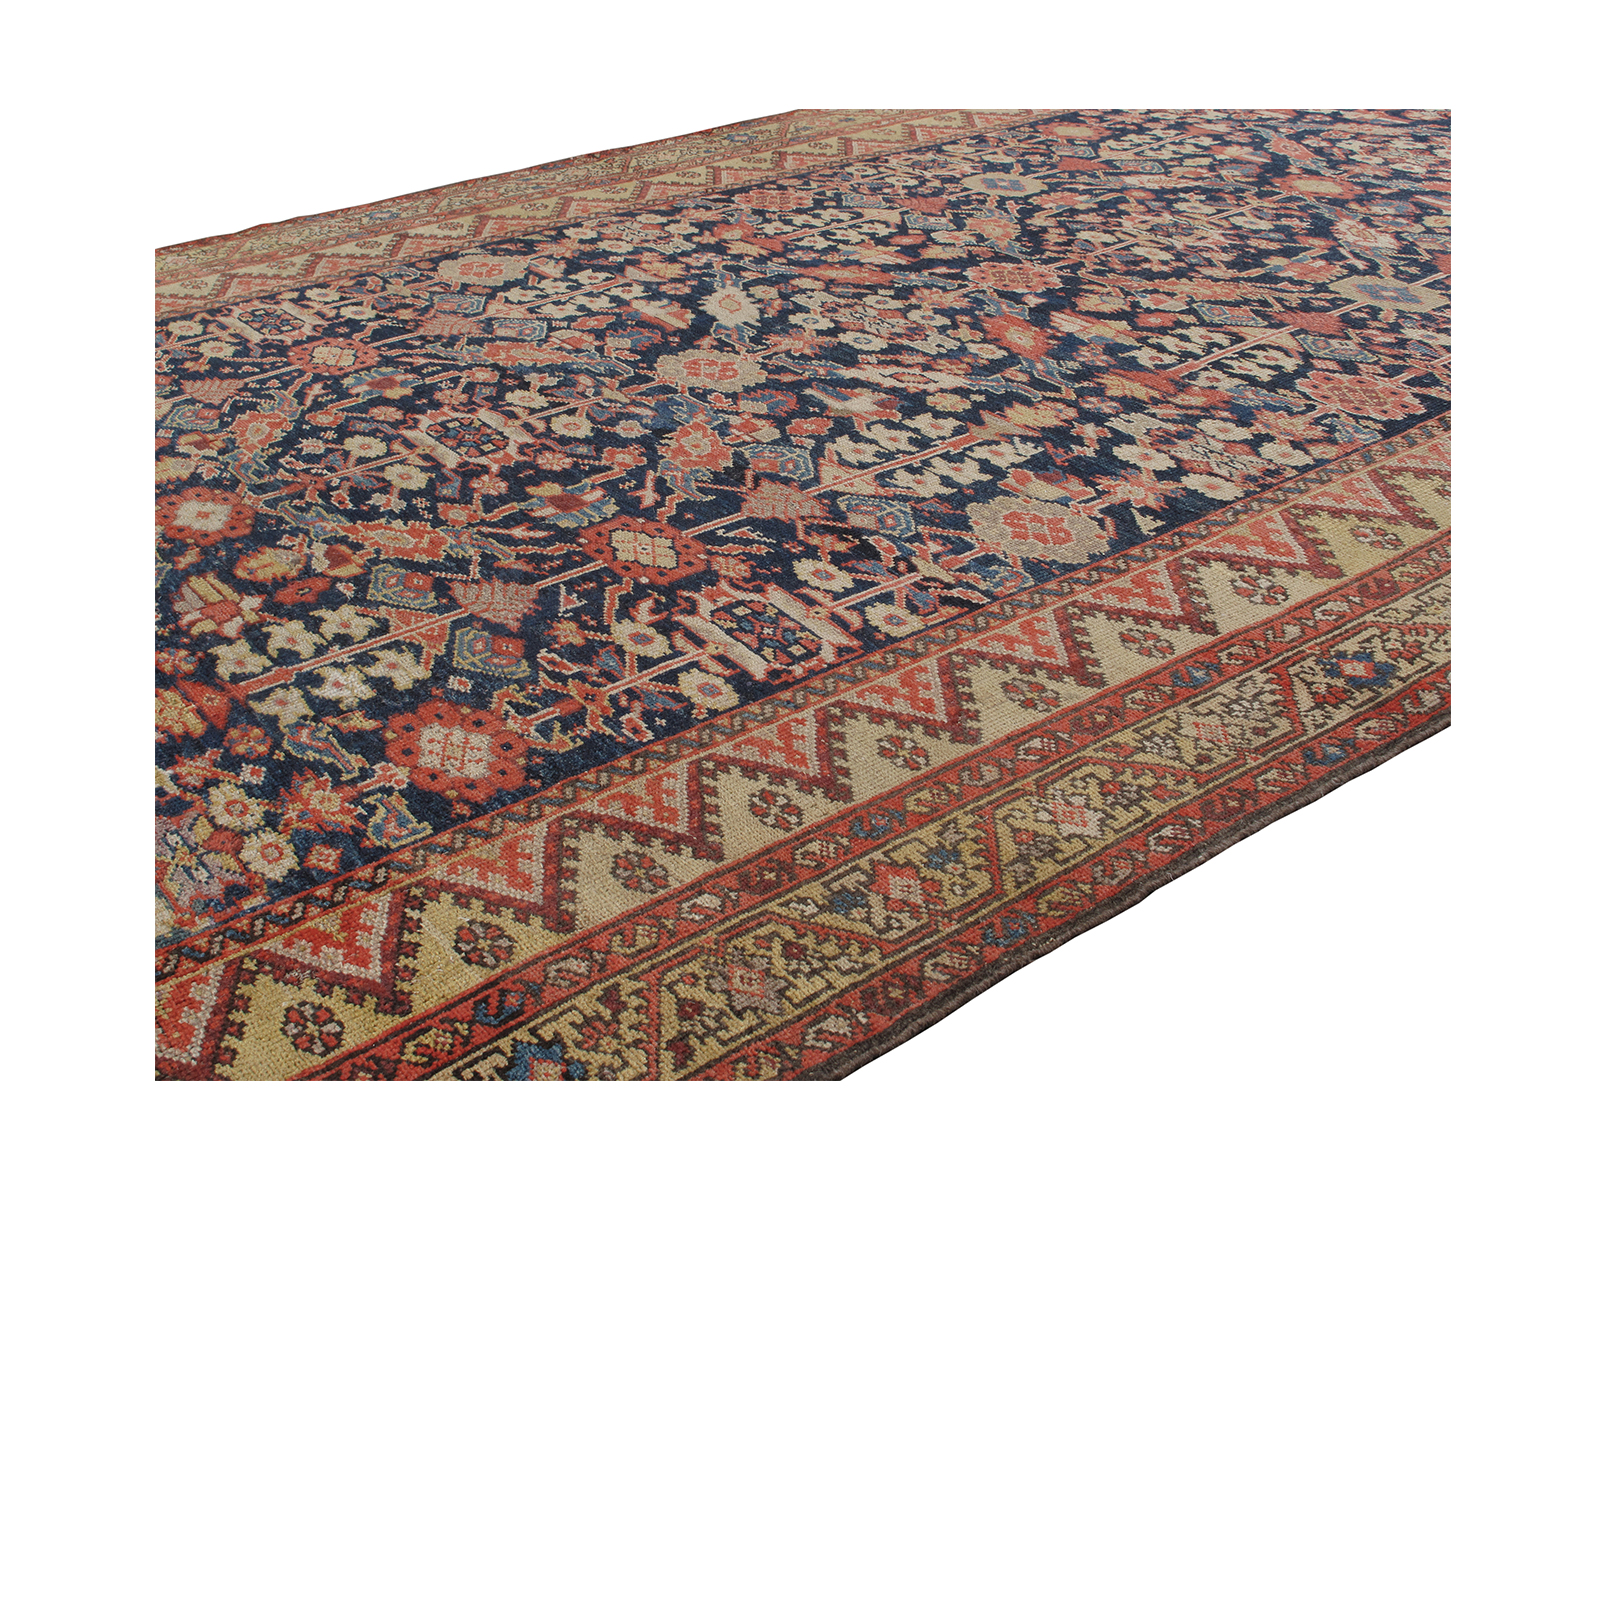 This Malayer rug is hand-knotted and made of 100% wool